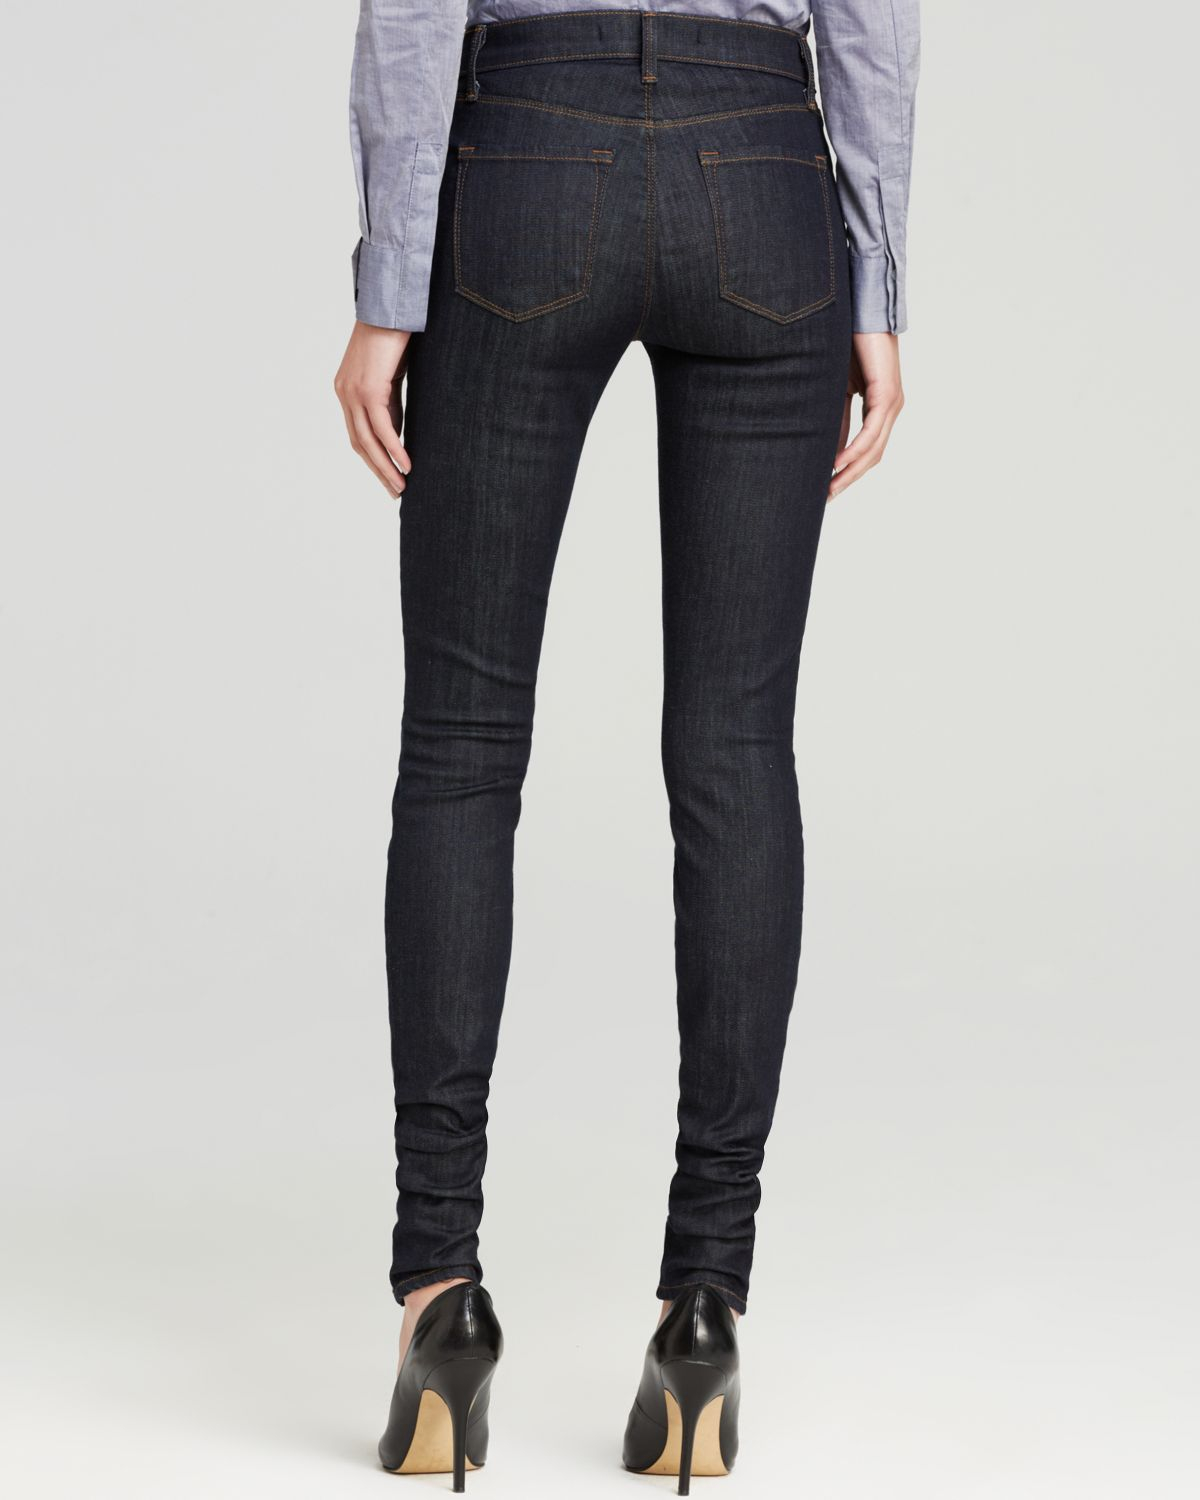 Lyst - J brand Jeans - Close Cut Jess High Rise Stacked 34